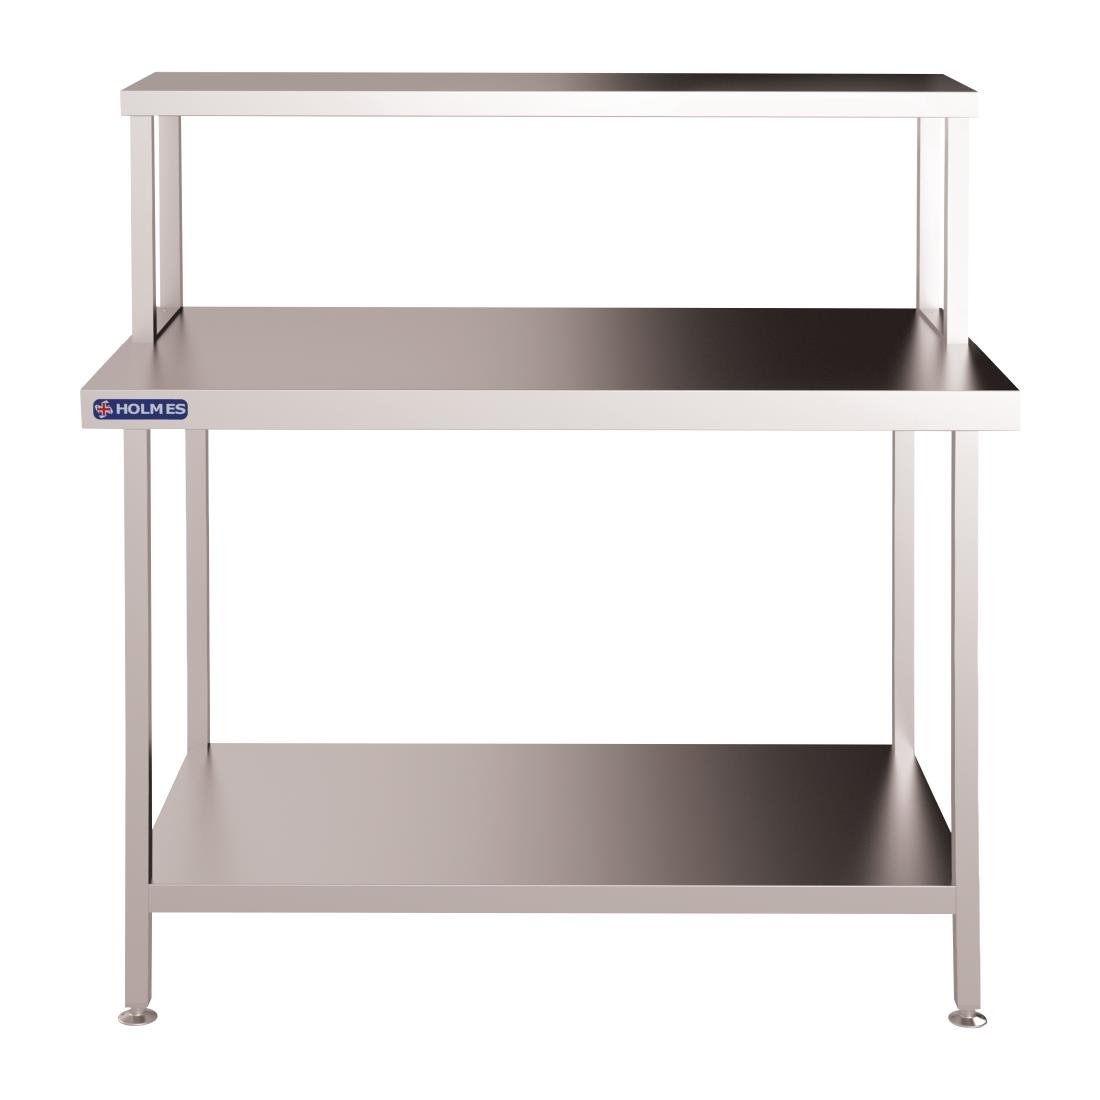 FC446 Holmes Stainless Steel Wall Prep Table Welded with Gantry 1500mm JD Catering Equipment Solutions Ltd